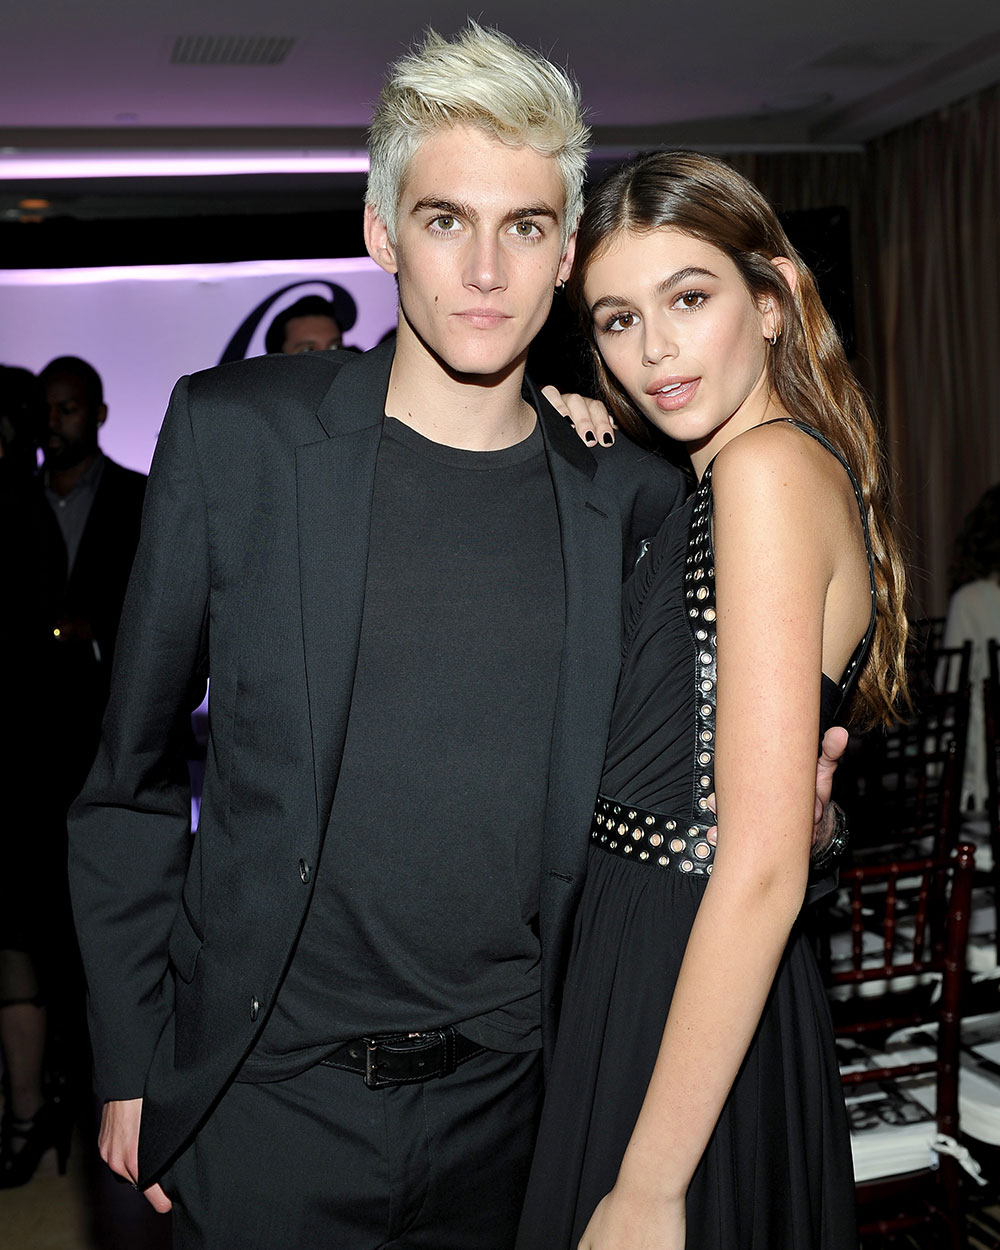 Presley and Kaia Gerber are the offspring of Cindy Crawford and Rande Gerber.